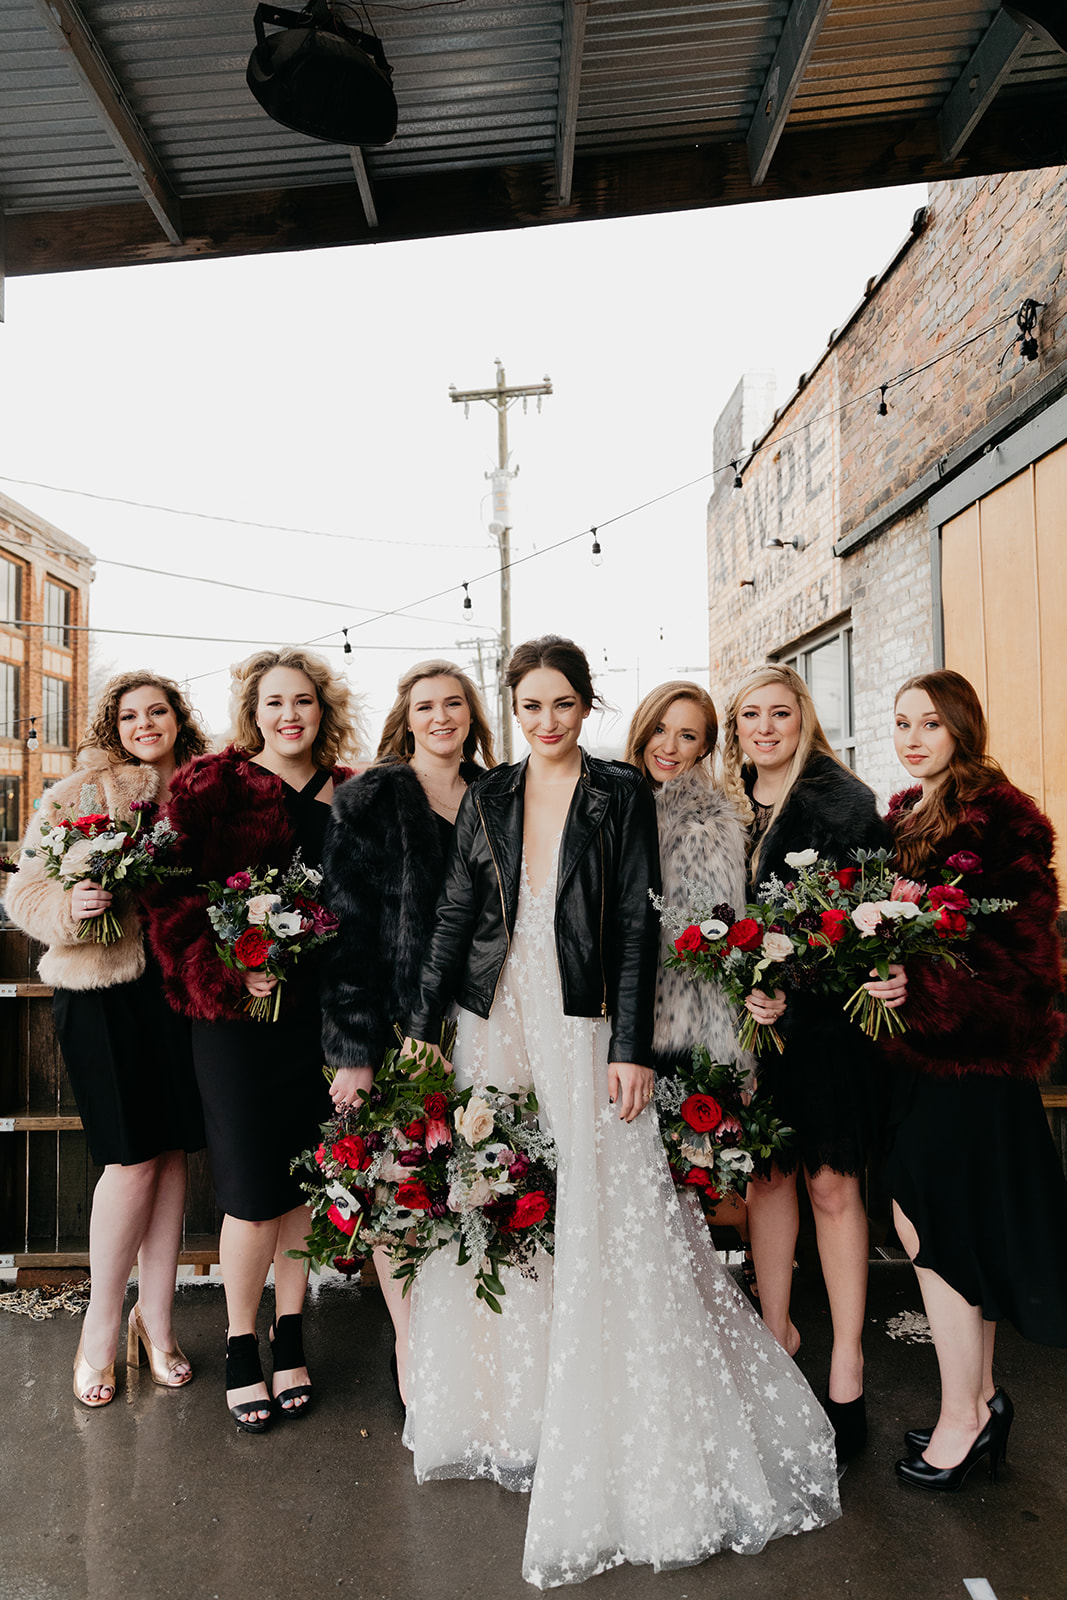 Burgundy, eggplant, and blush bouquets with black bridesmaid dresses and the bride in a leather jacket! Badass Nashville wedding florals.